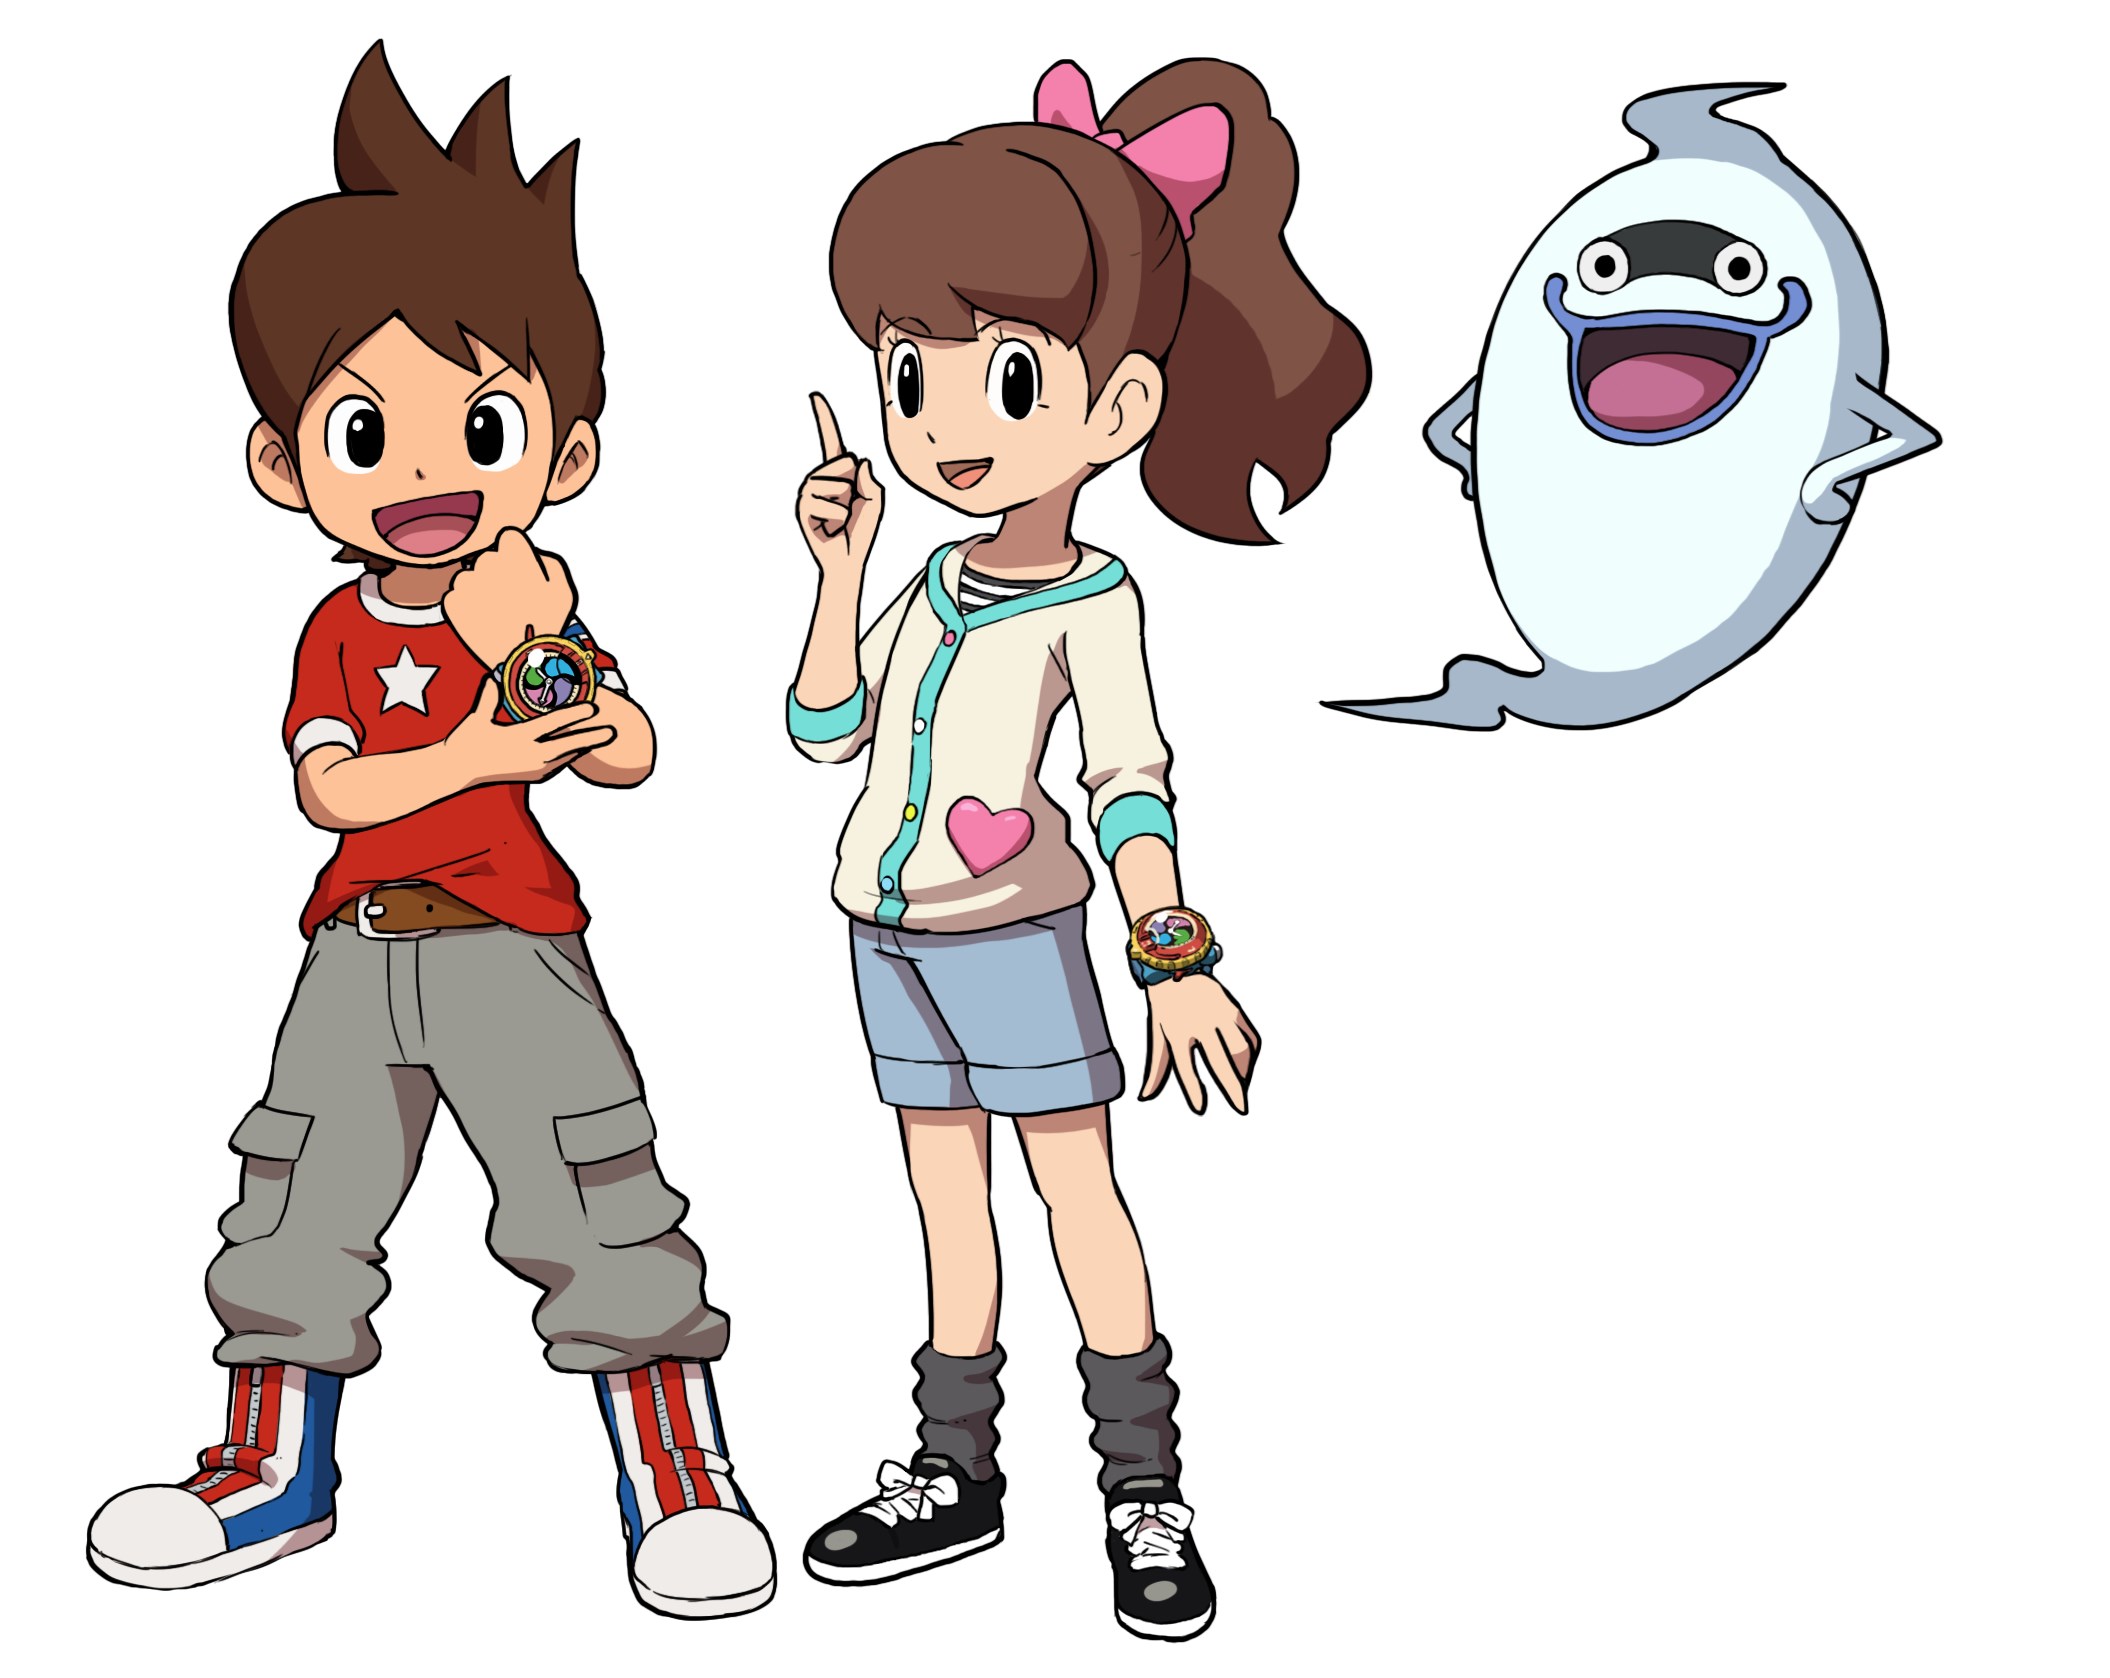 3ds_yokaiwatch2_char_nate_kate_whisper_png_jpgcopy